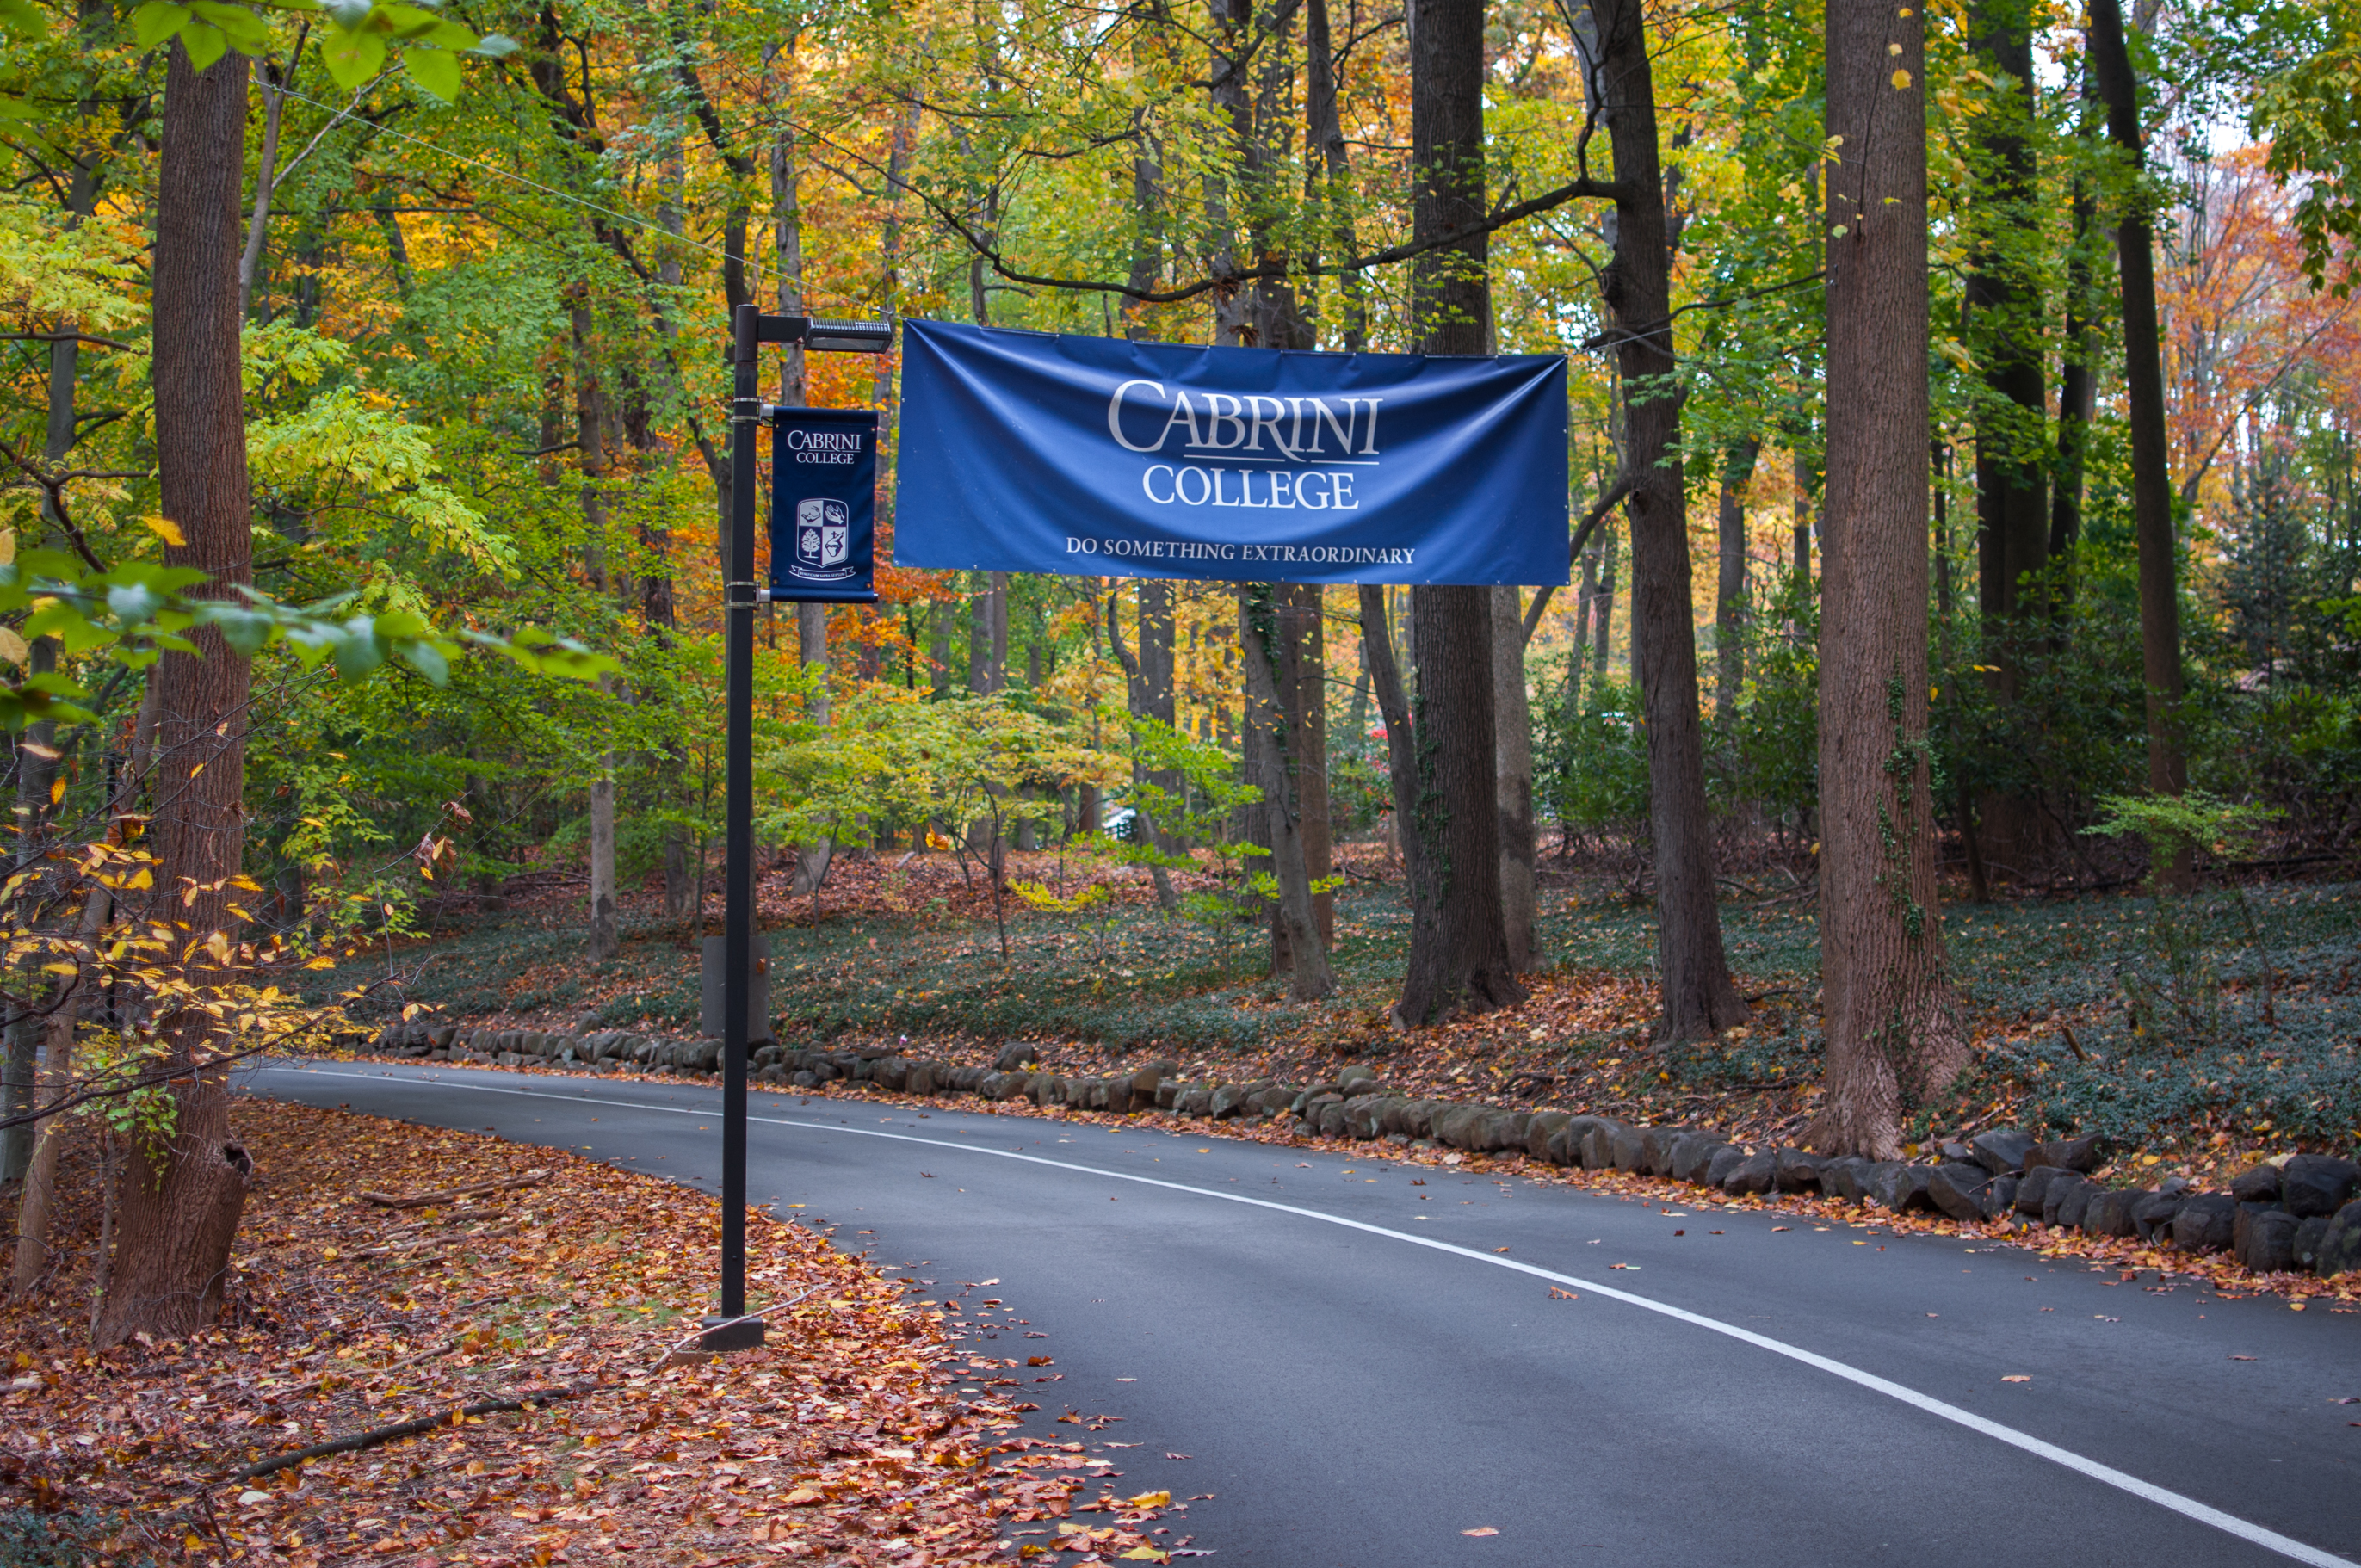 Main campus drive with fall foliage